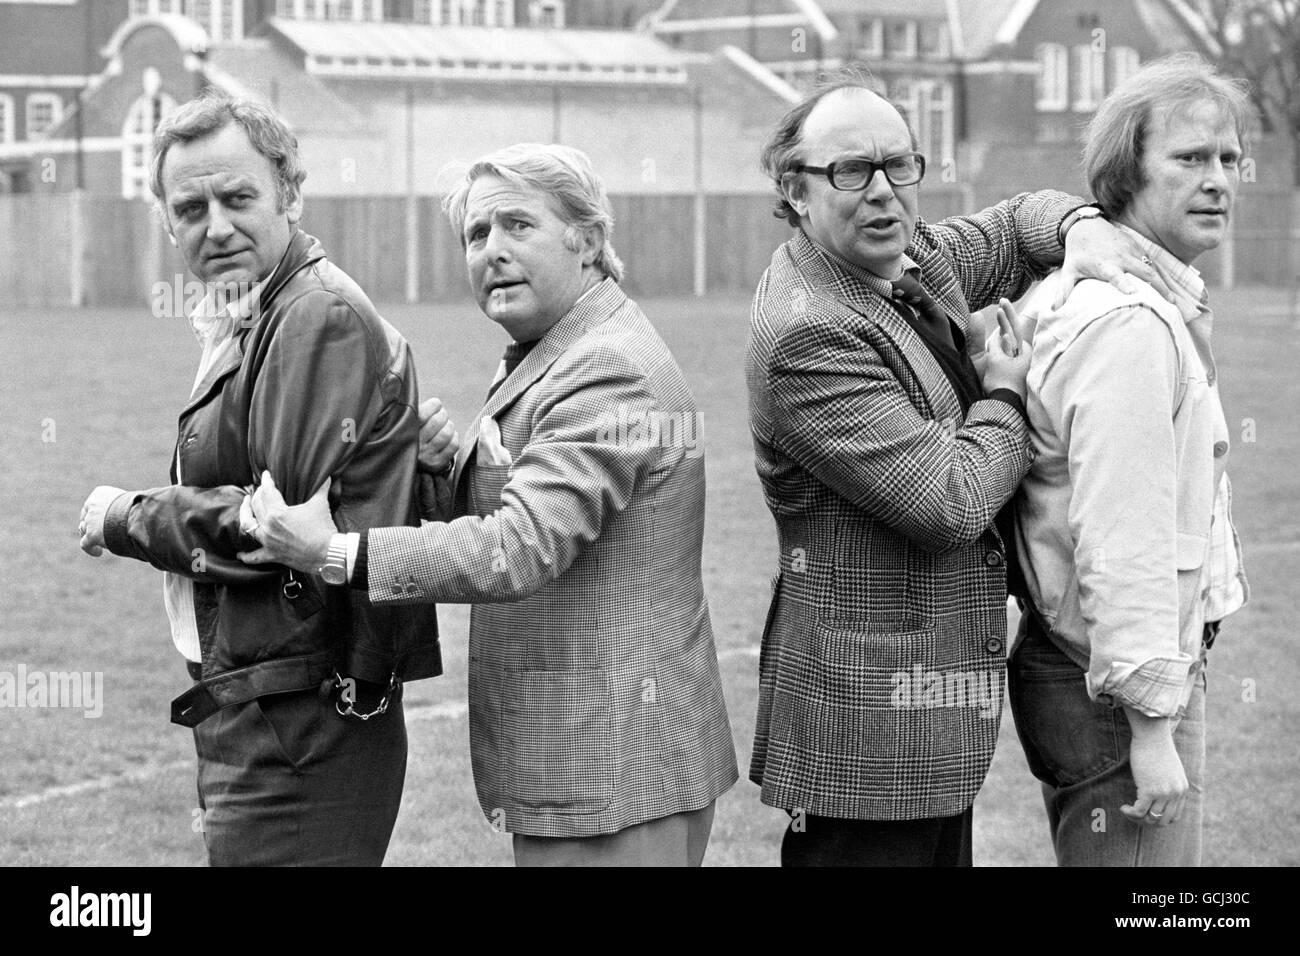 Comedians Eric Morecambe and Ernie Wise in the Hammersmith grounds of Euston Films today, where they teamed up with tough crimebusters Carter and Regan of 'The Sweeney' Fame. Inspector Regan, actor John Thaw (left) and Det Sgt Carter, actor Dennis Waterman appeared as gusts on a Morecambe and Wise Christmas show in 1976. They joked they would only appear if Eric and Ernie agreed to appear in their show, and now the quartet will play in The Sweeney: 'Hearts and Minds' an episode of the next series on ITV. Stock Photo